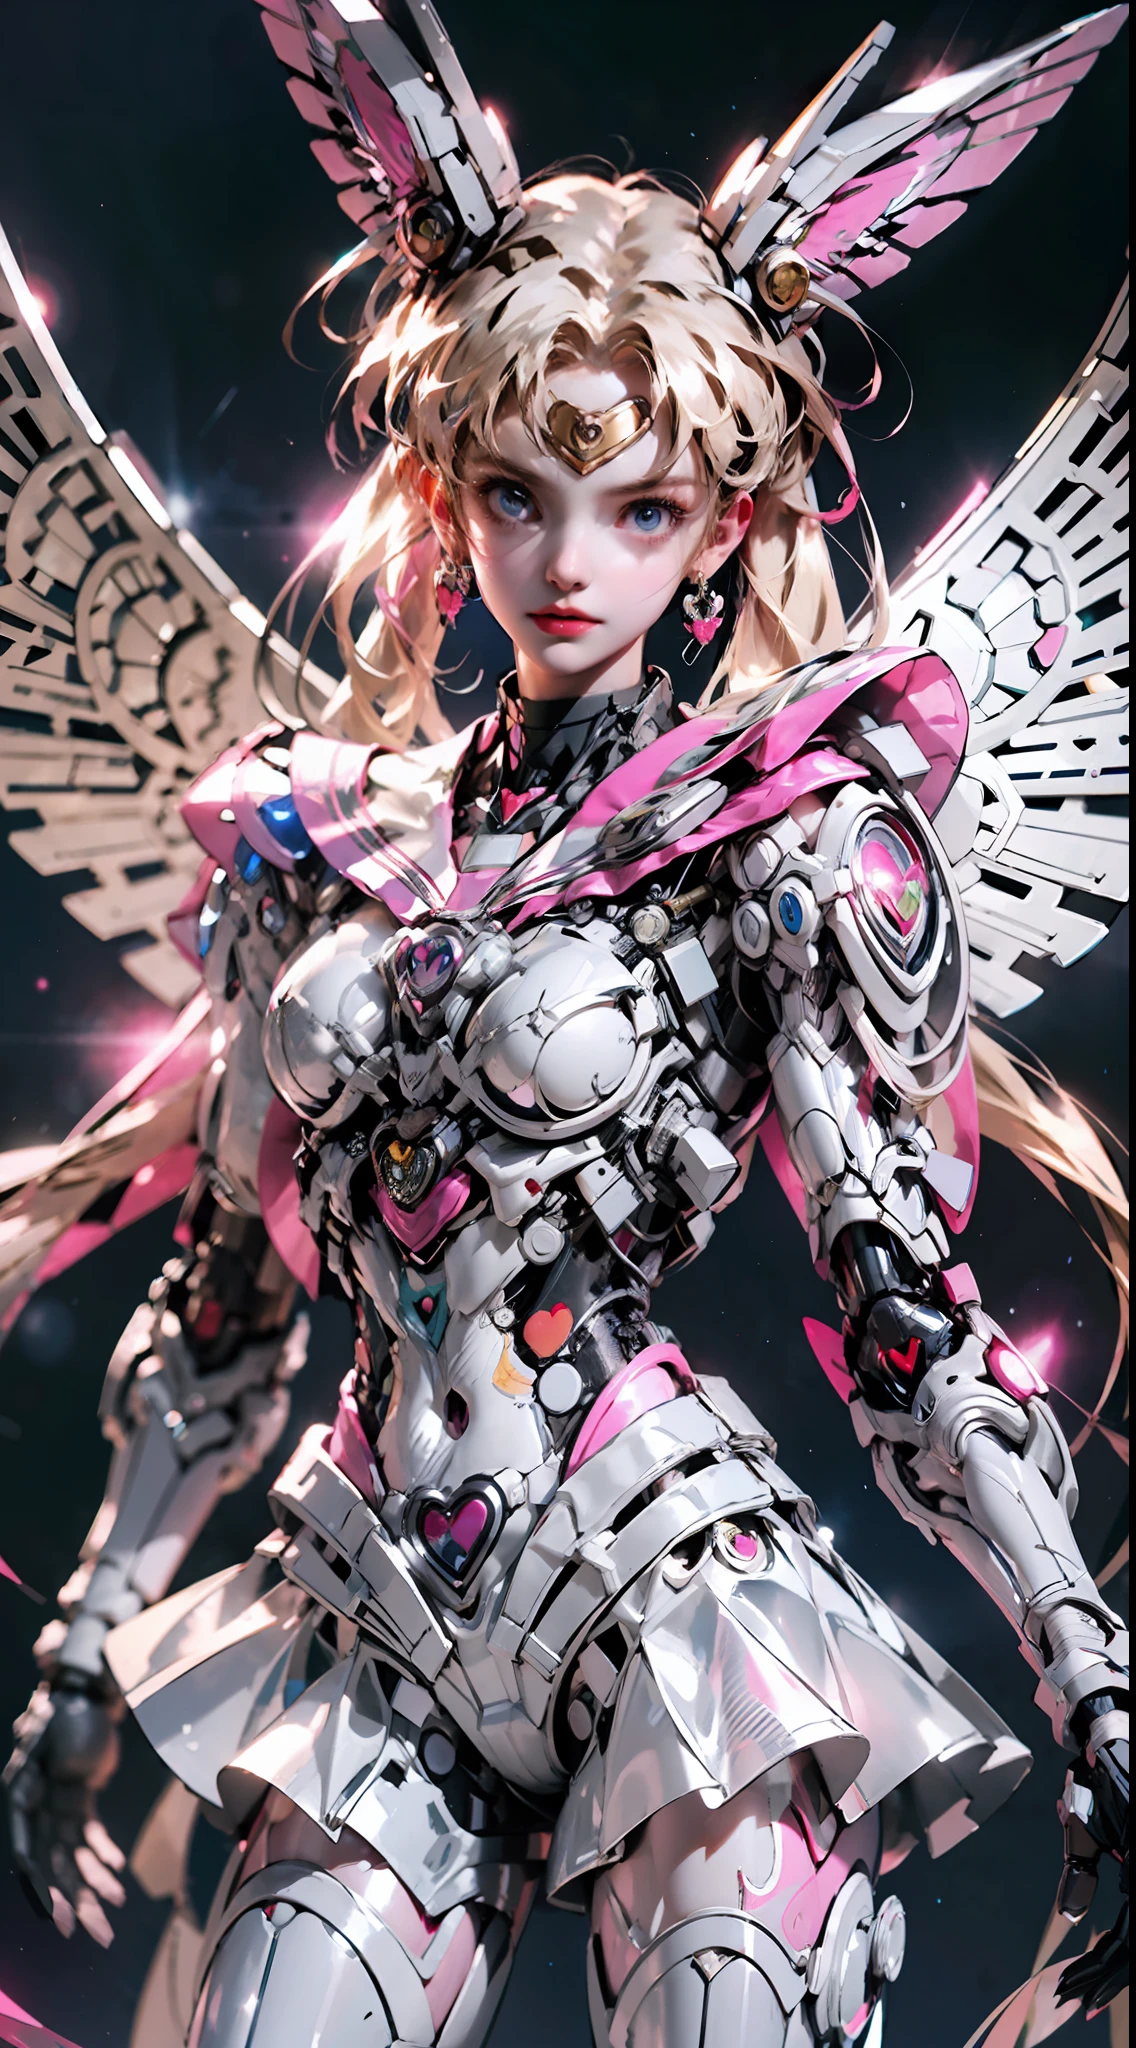 1 mechanical girl: 1.4, Sailor Moon, white mechanical arm, humanoid body, pink sailor suit, good-looking face, sailor Moon, moon hare, rabbit ears, mechanical ears, white blouse, blonde hair, mechanical arm, pink skirt, side, heart-shaped robot in the background, sci-fi background, complex background, hair glowing hair, forehead hair light, moon, panorama, mechanical wings, large wings in the background